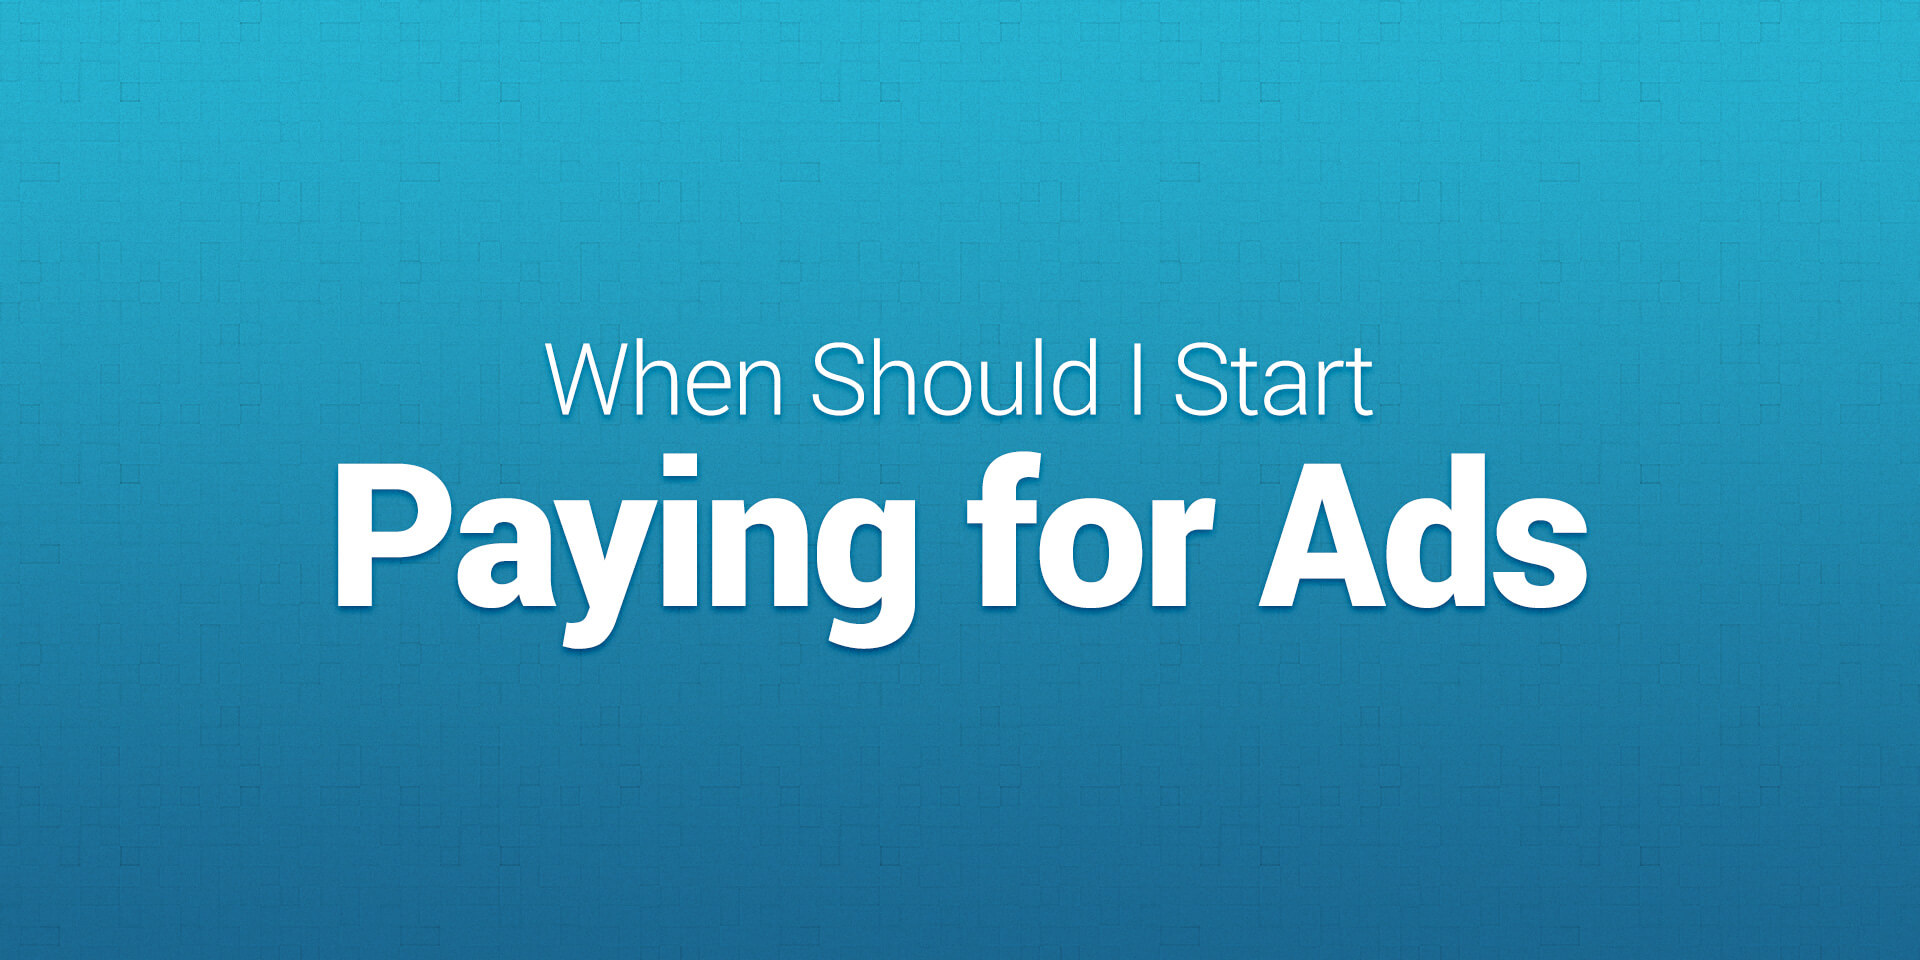 When should I start paying for ads?